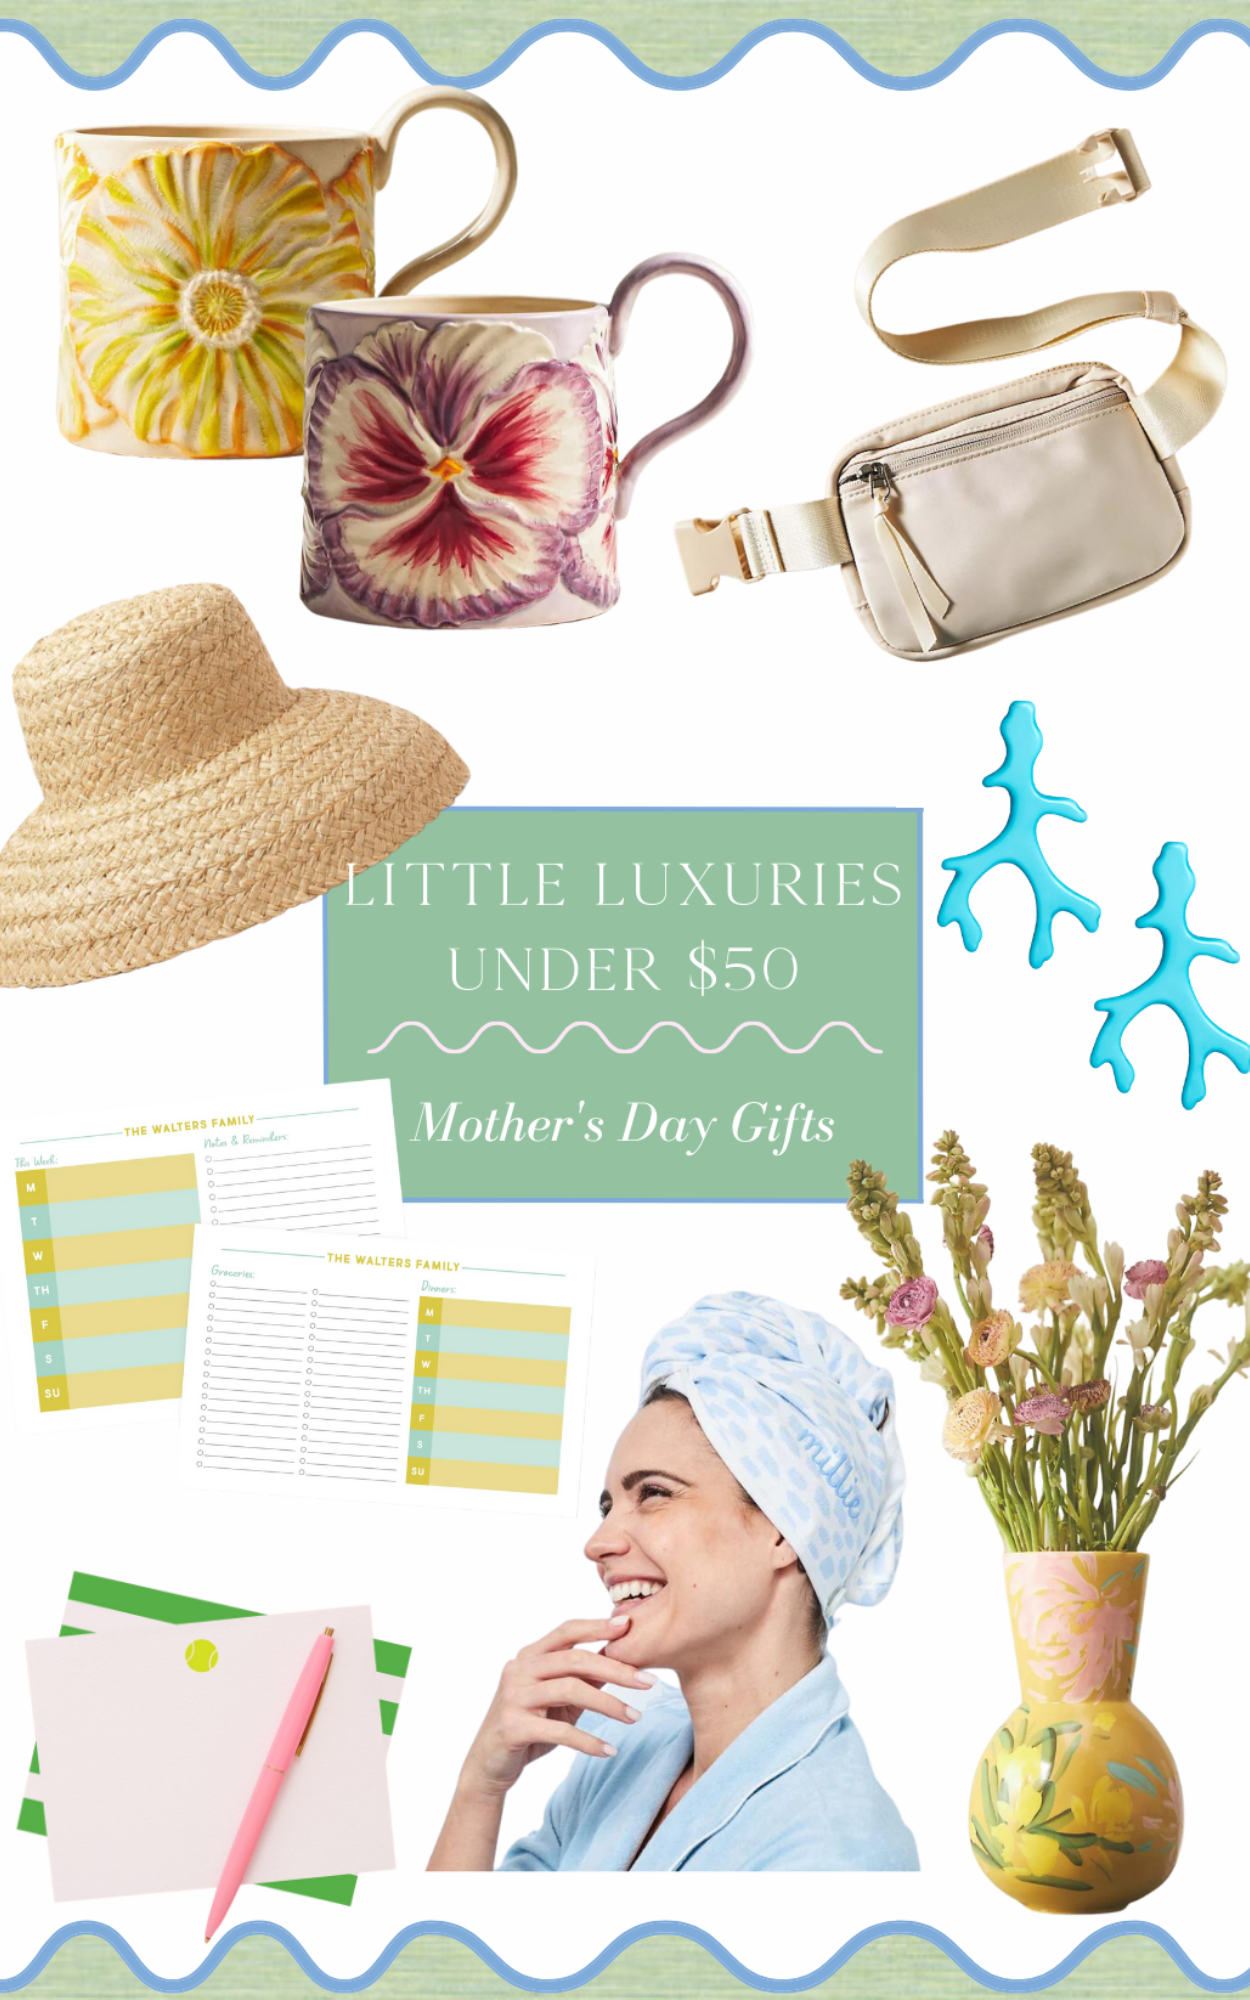 Mother's Day gift ideas under $50, affordable Mother's Day gift ideas, affordable Mother's Day gifts